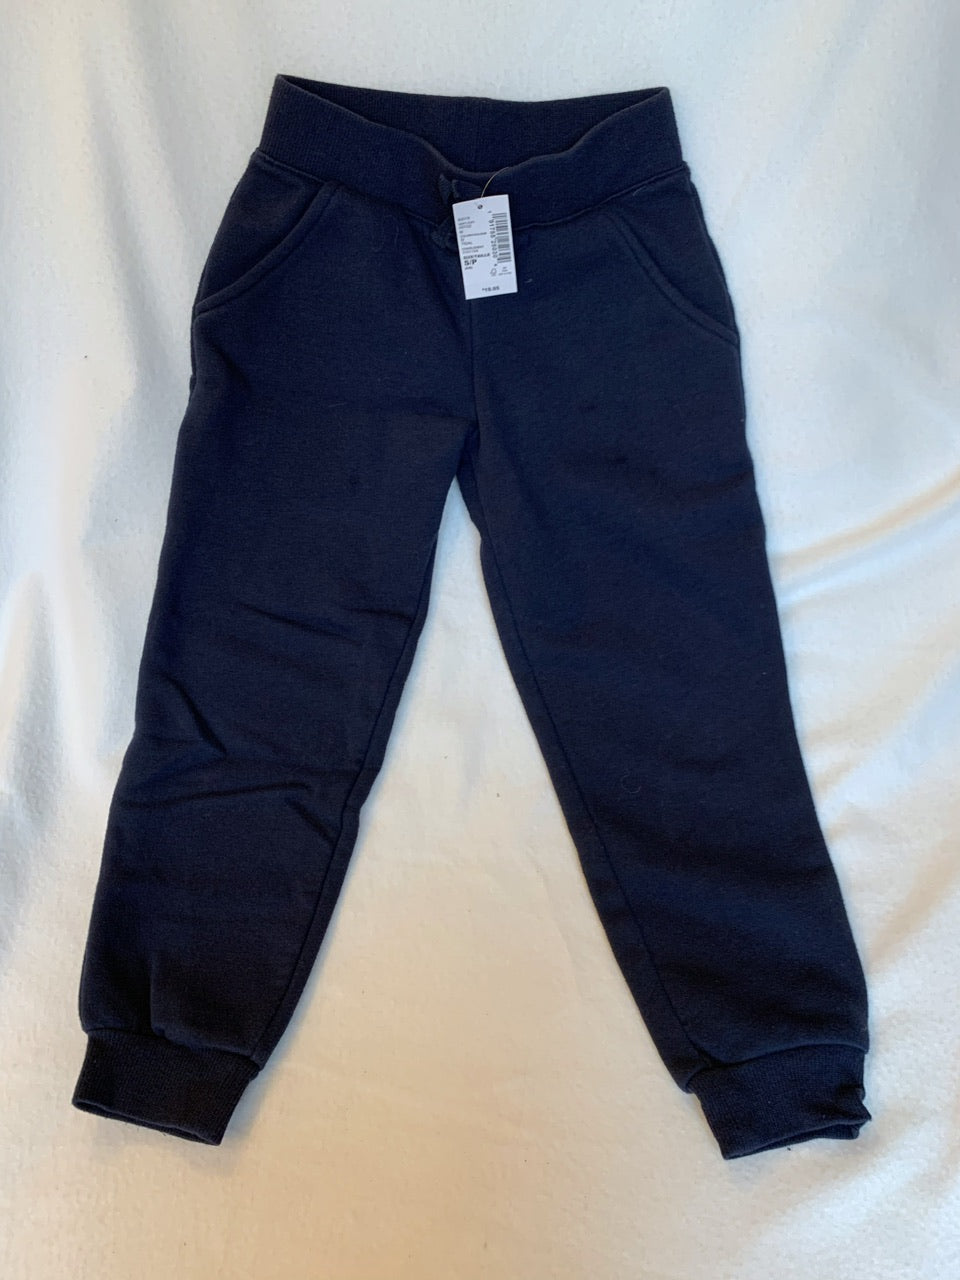 Size 5/6 NWT Children’s Place Girl’s French Terry Jogger Pants - Tidal Blue